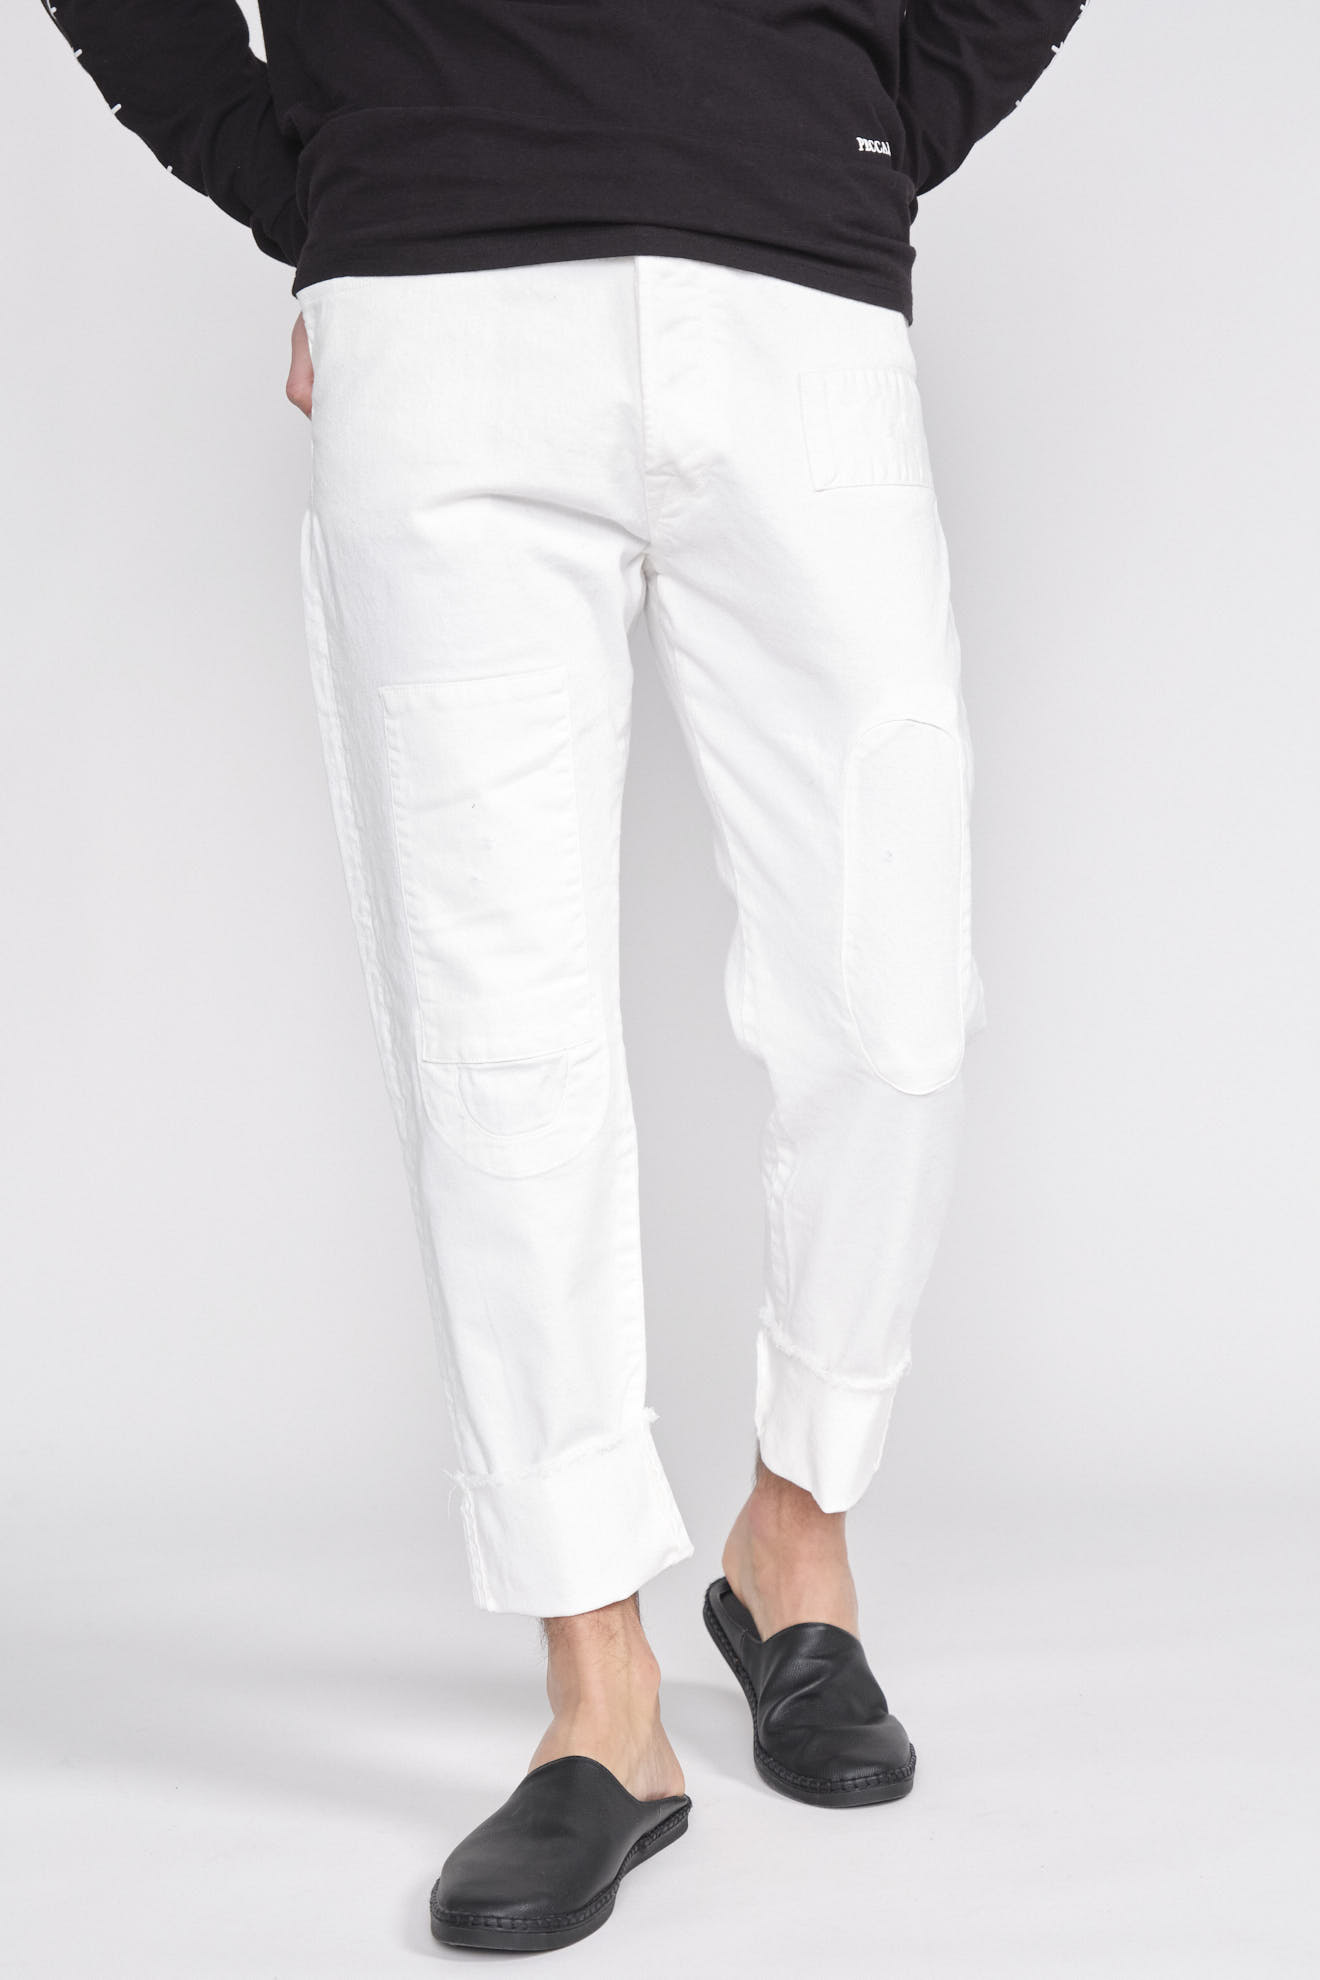 maurizio massimino Jose - denim jeans with patch patches white 46